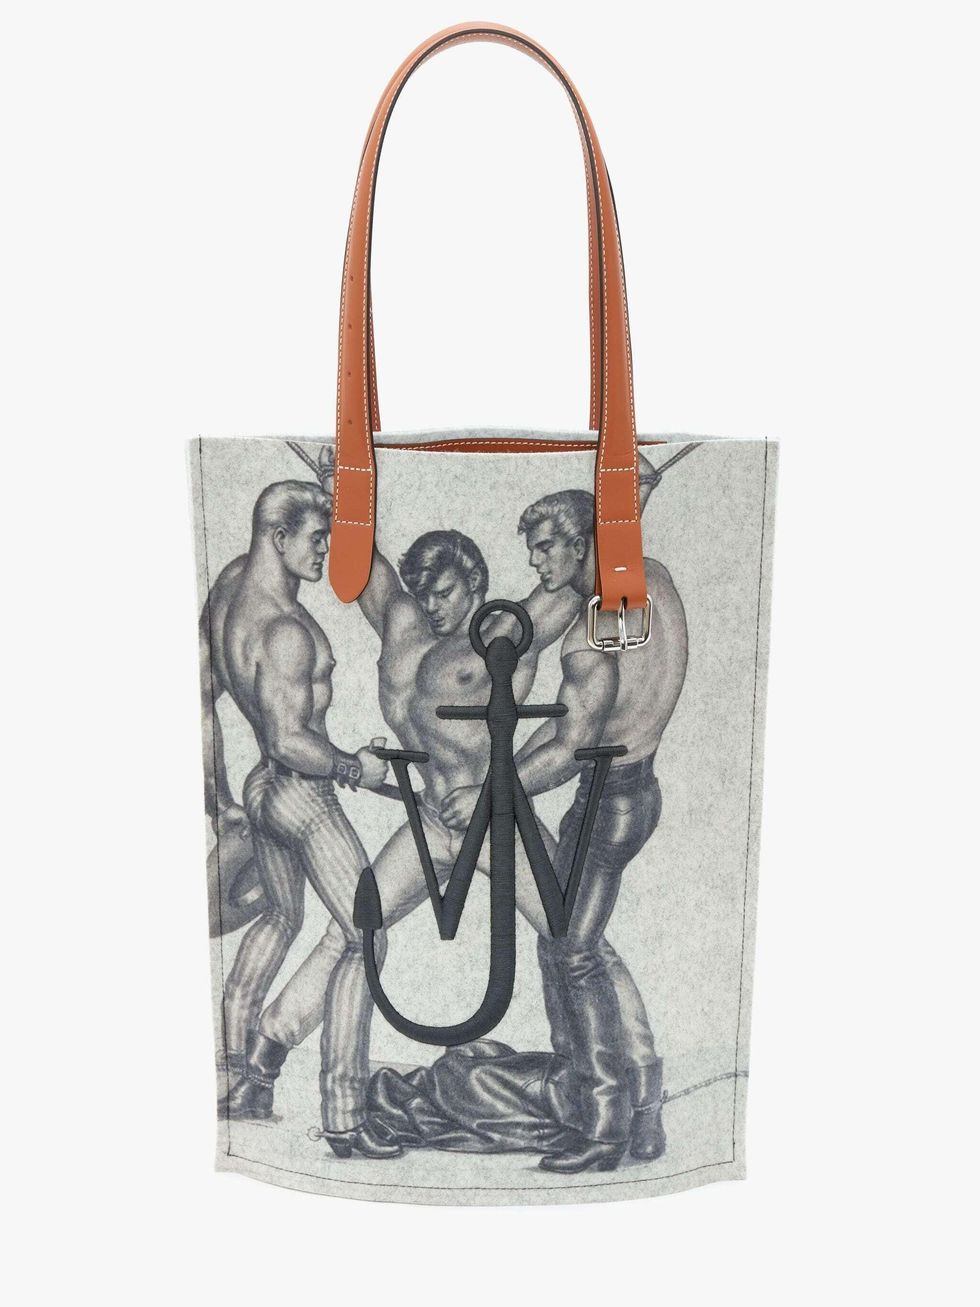 JW Anderson for Tom of Finland